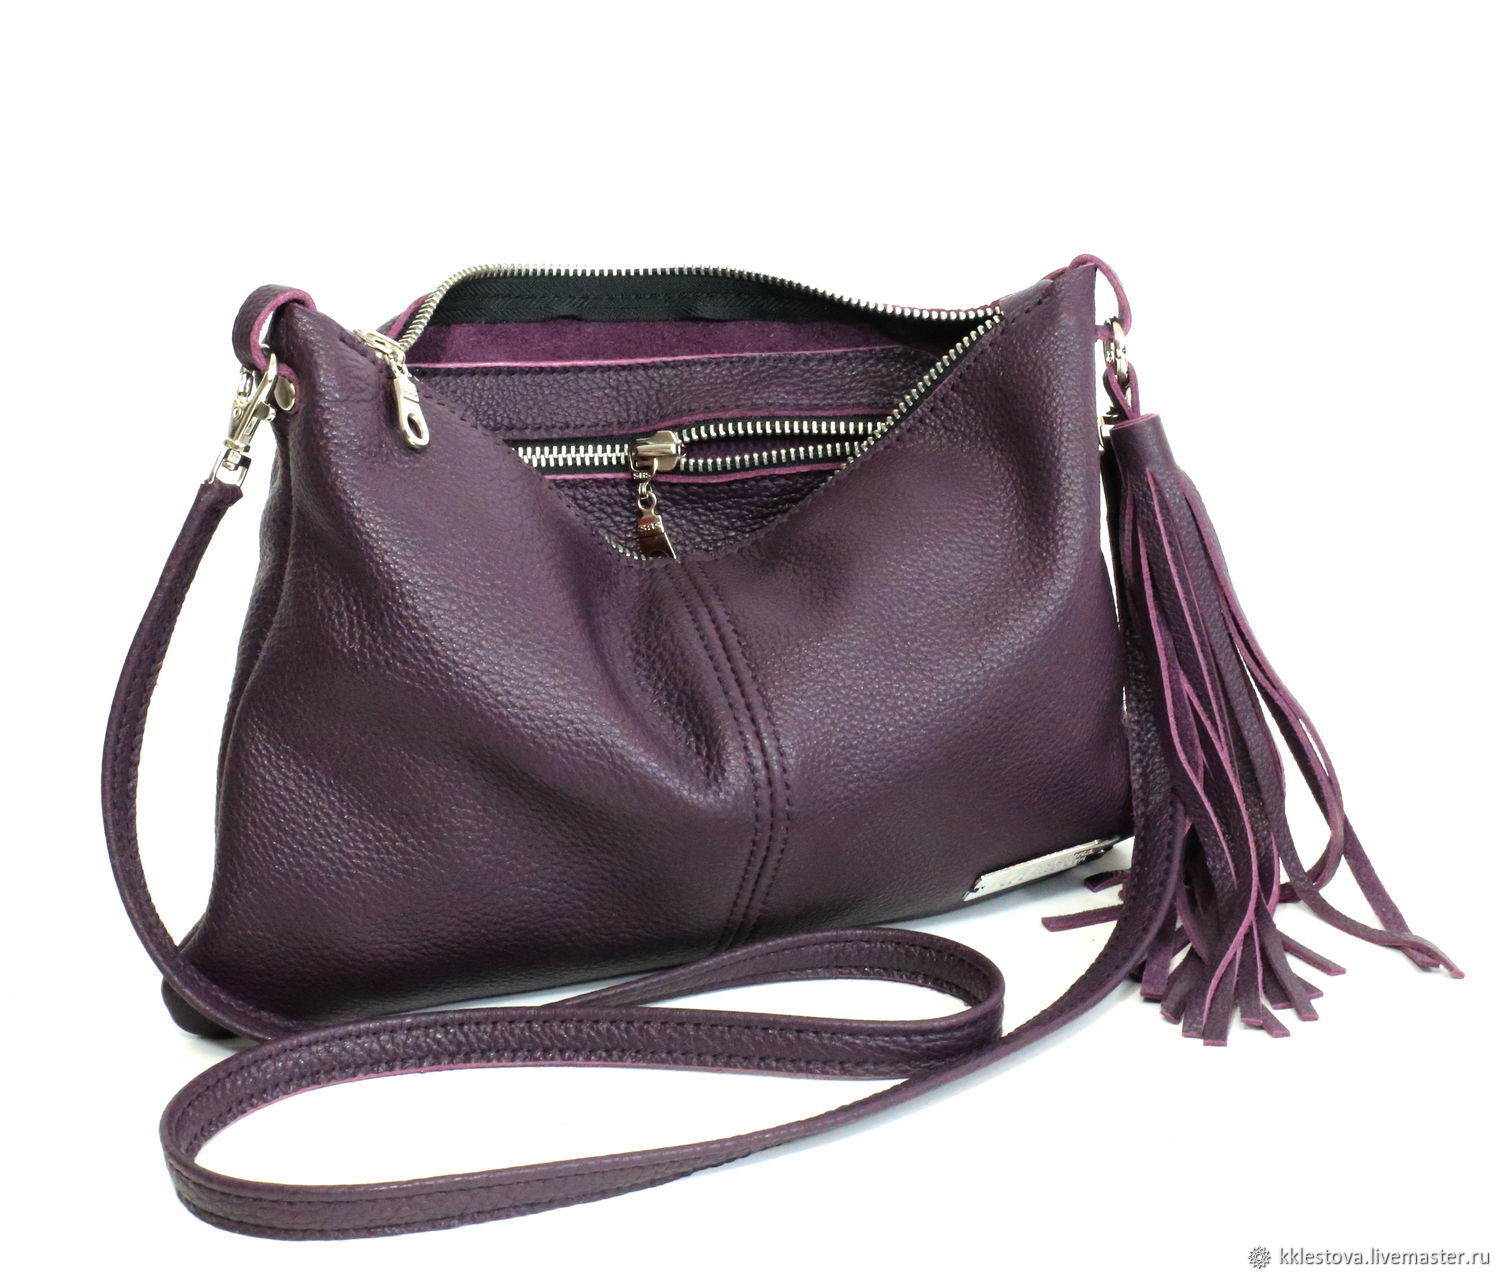 Purple leather Crossbody bag-A leather clutch for the evening, Clutches, Moscow,  Фото №1